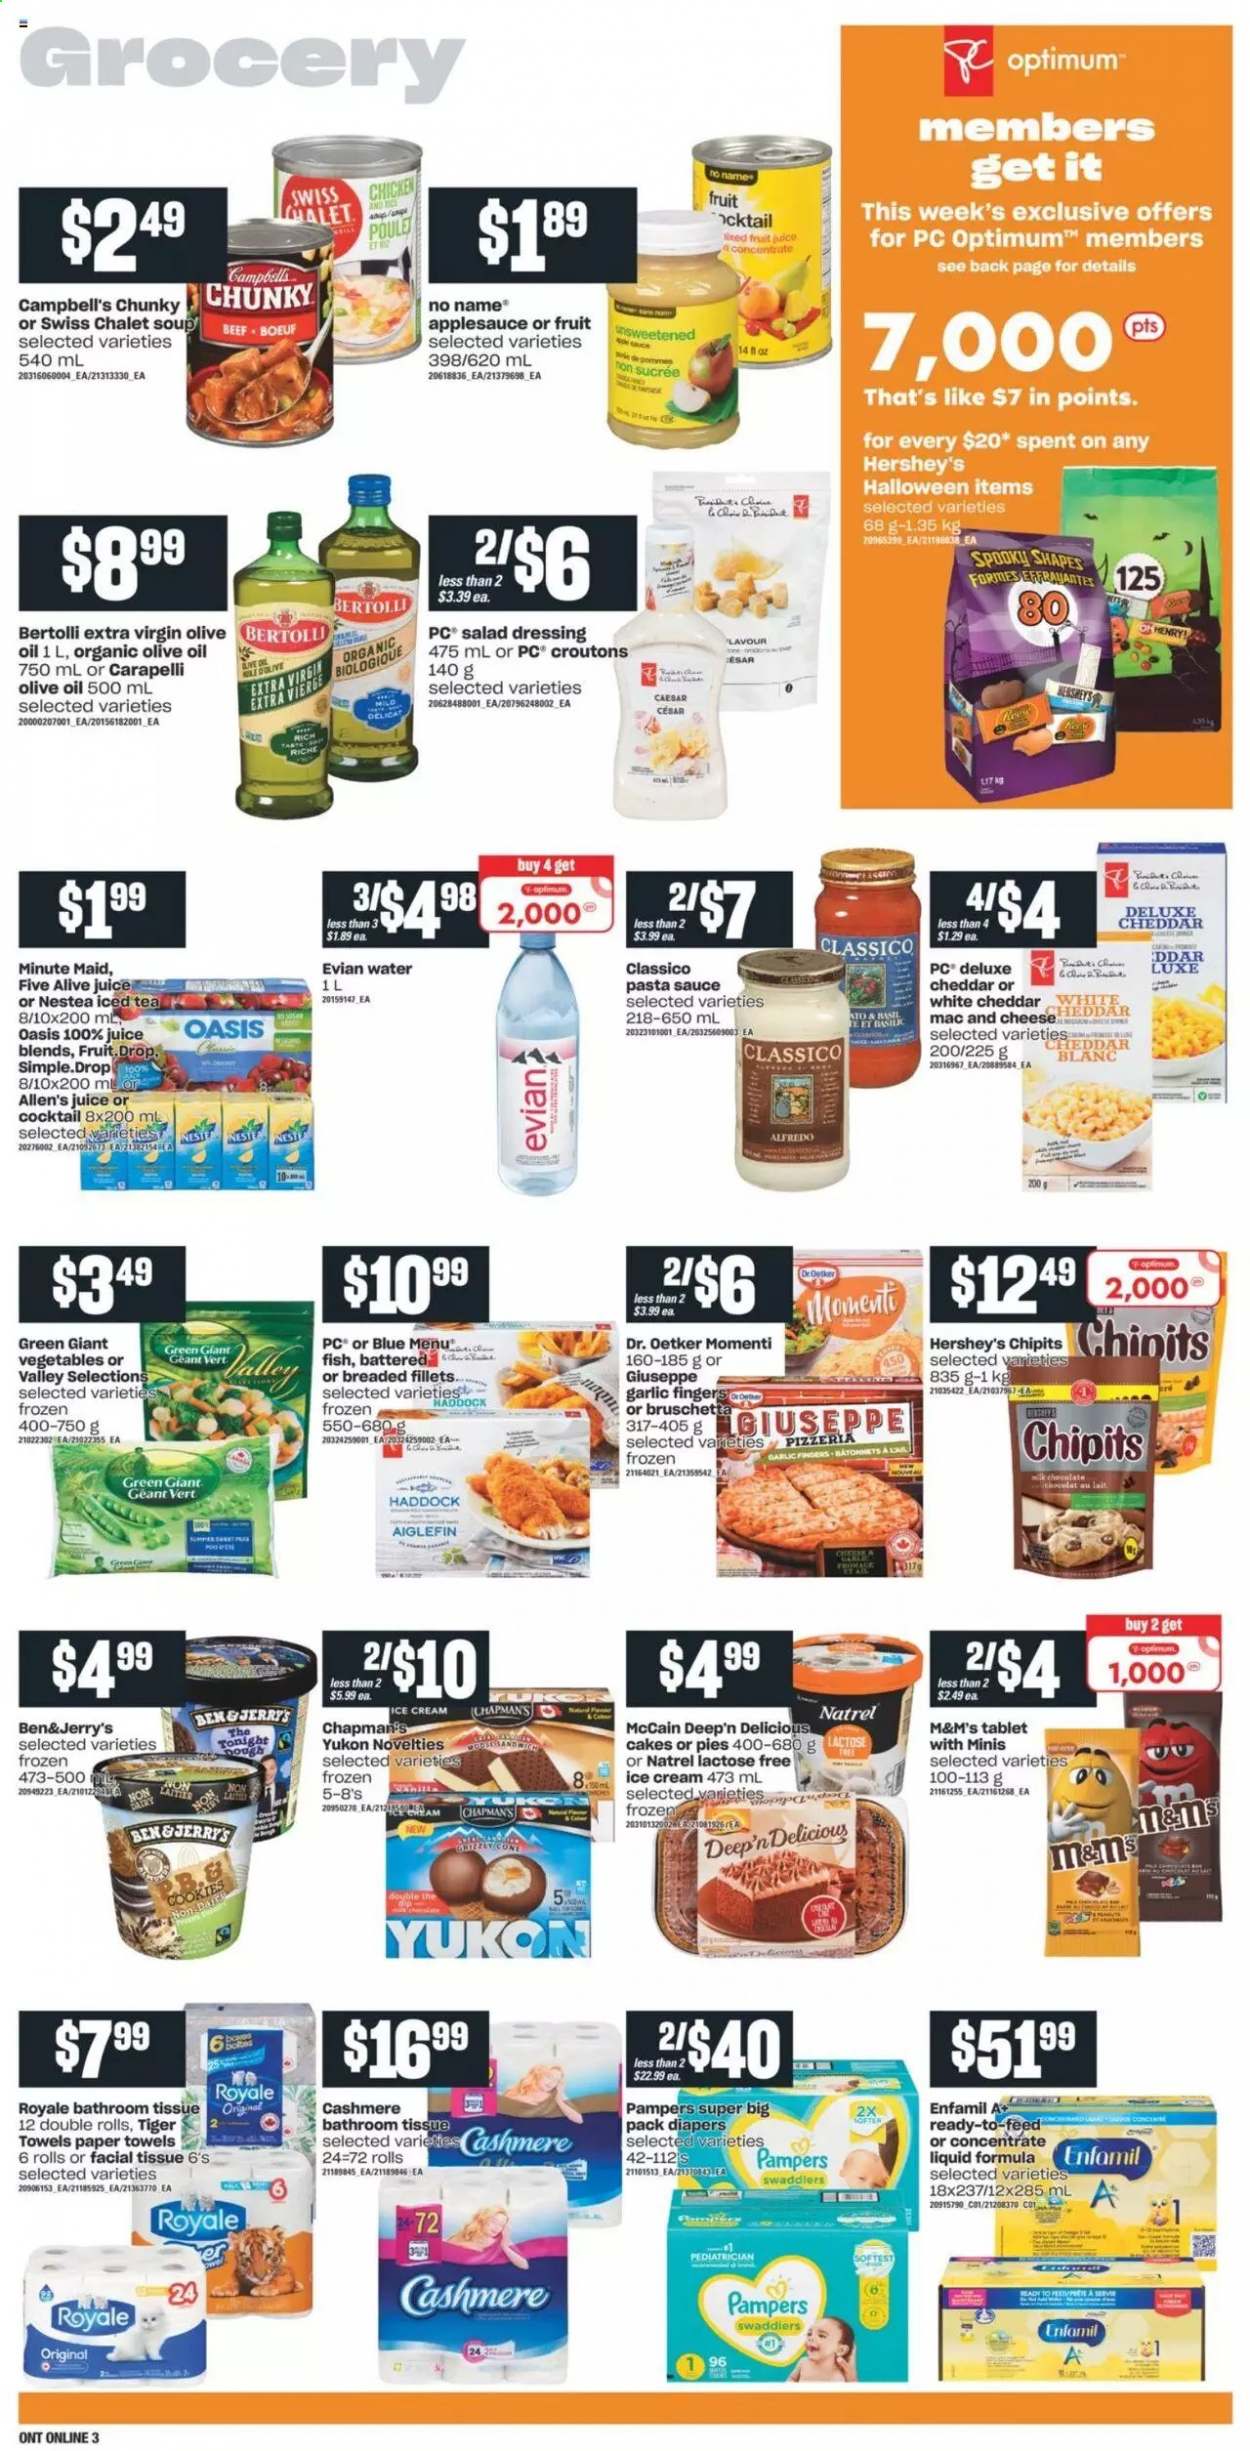 thumbnail - Independent Flyer - August 26, 2021 - September 01, 2021 - Sales products - tablet, cake, garlic, haddock, fish, No Name, Campbell's, macaroni & cheese, pasta sauce, soup, sauce, Bertolli, bruschetta, cheddar, Dr. Oetker, ice cream, Hershey's, McCain, cookies, croutons, salad dressing, dressing, Classico, extra virgin olive oil, olive oil, oil, apple sauce, juice, fruit juice, ice tea, fruit punch, Evian, Enfamil, nappies, bath tissue, kitchen towels, paper towels, Optimum, Pampers, M&M's. Page 7.